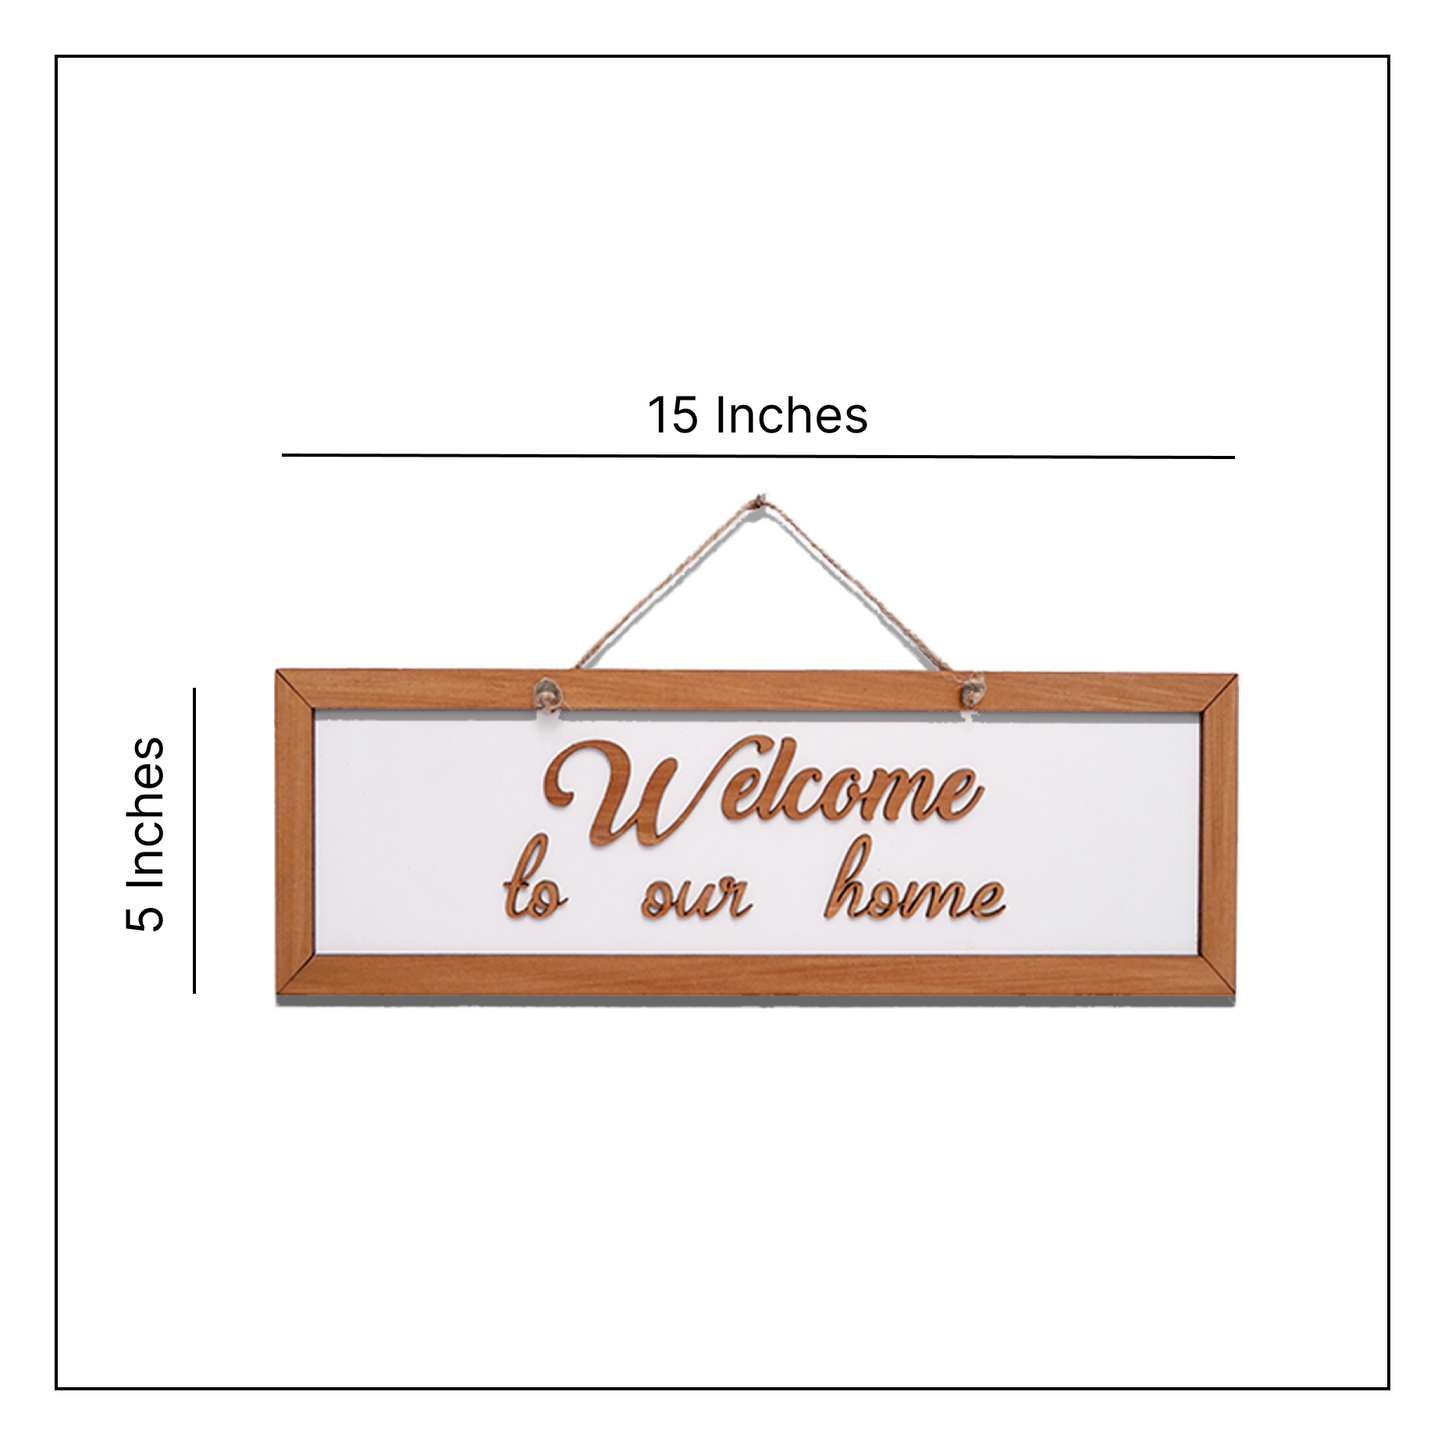 Welcome To Our Home Wooden Door and Wall Hanging